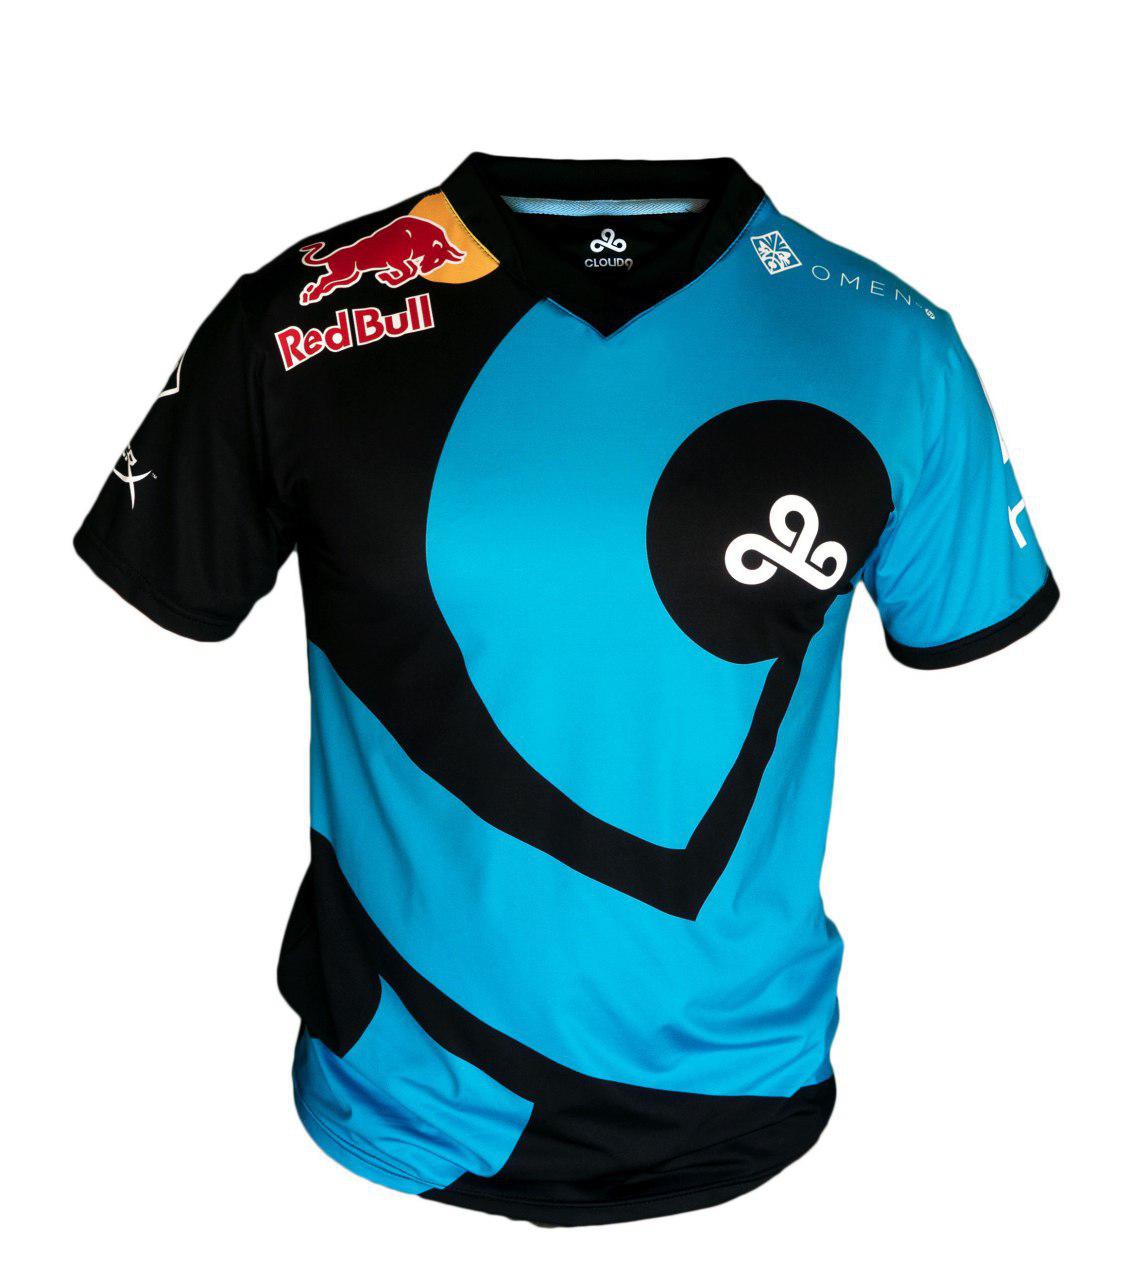 Forms c 9. Cloud9 Red bull Jersey. Cloud9 форма. Форма cloud 9 2023. C9 форма.